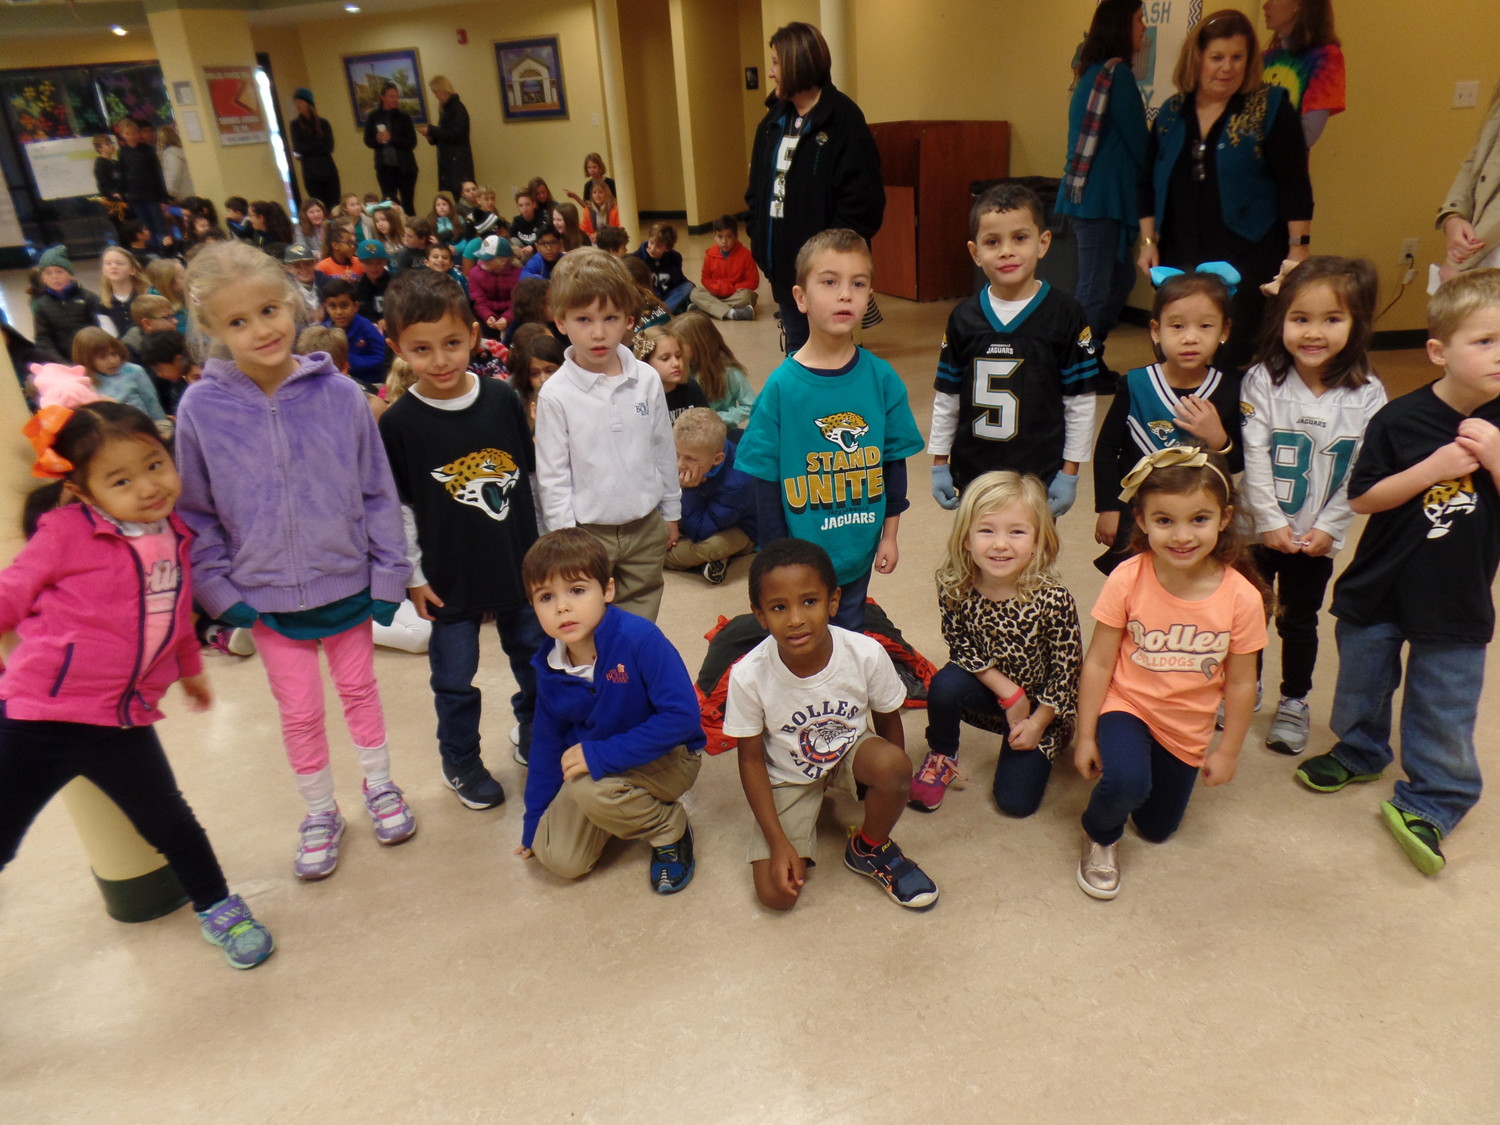 The Bolles Lower School Ponte Vedra Beach Campus wore more teal and black than orange and blue Friday, Jan. 19, during the school’s Jaguars Spirit Day leading up to the team’s AFC Championship matchup with the New England Patriots. At the direction of Ponte Vedra Beach Campus Head Peggy Campbell-Rush, students and faculty convened in Ponte Vedra Hall after their flag ceremony for a group chant of “We are Jaguars,” and “Duval.”